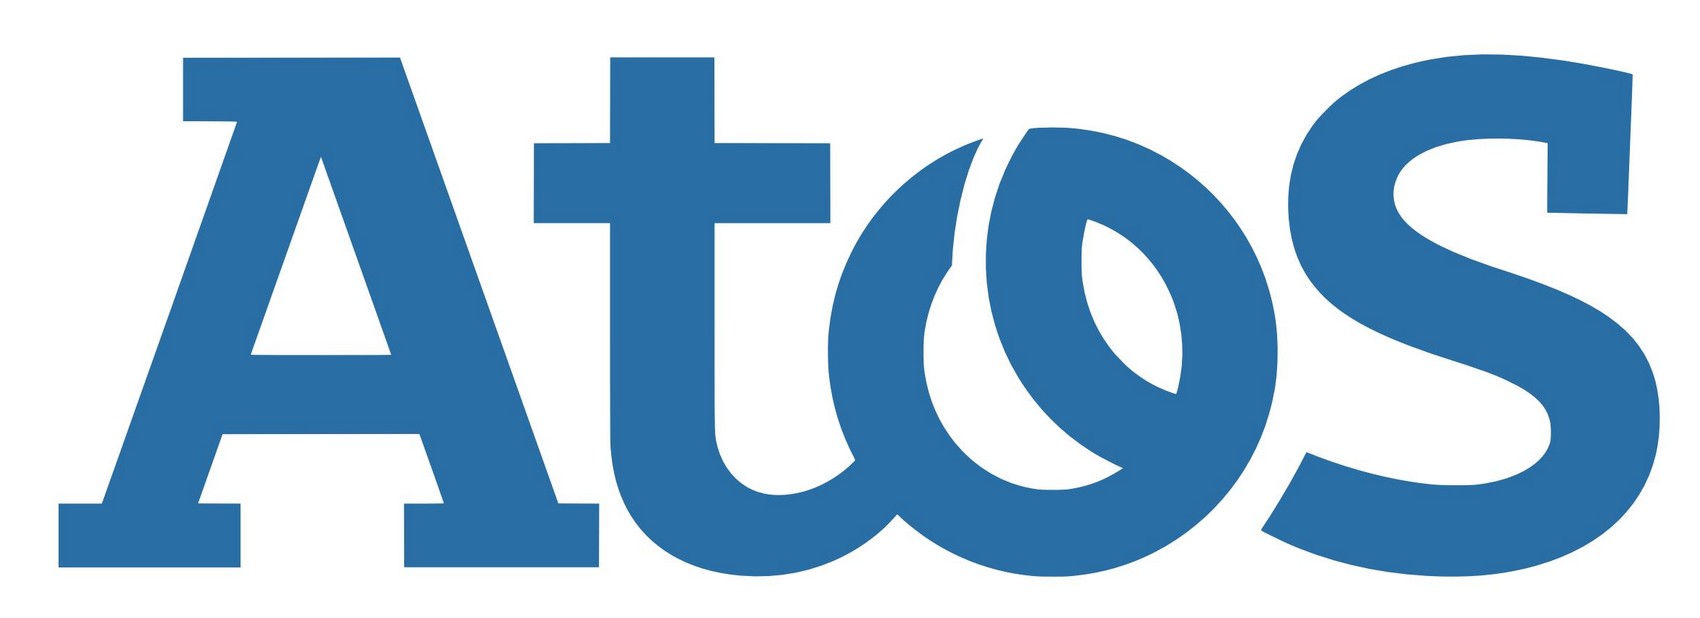 Atos Is An International Information Technology Services Company With Annual Revenues Of Eur 8.5 Billion And 74,000 Employees In 48 Countries. - Atos Vector, Transparent background PNG HD thumbnail